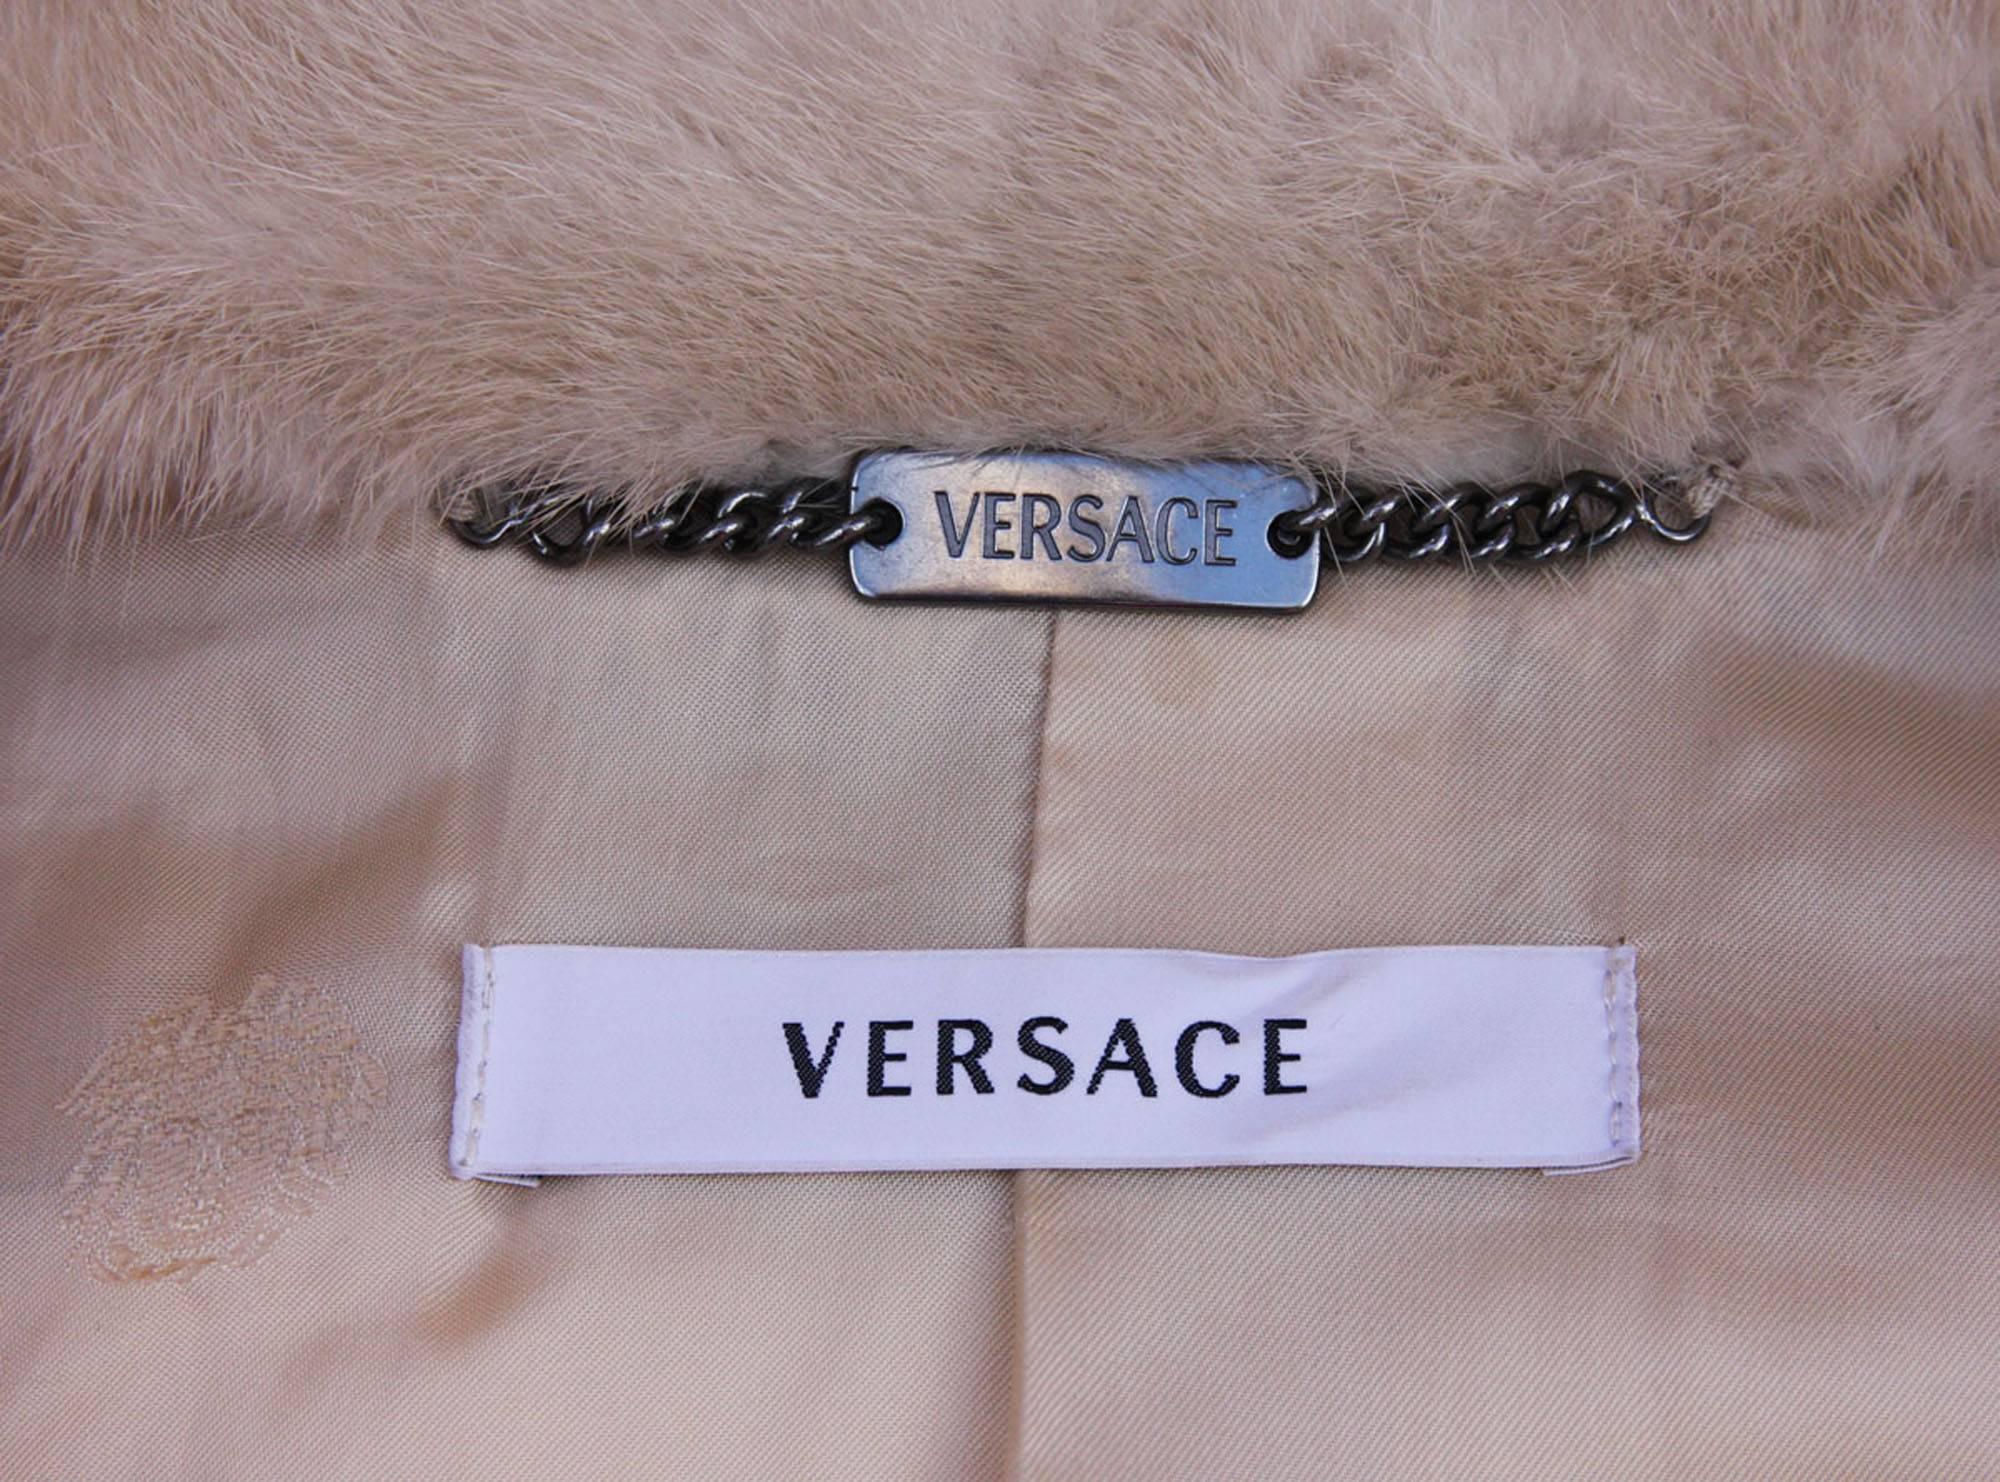 Women's New VERSACE Mink Patent Leather Cream Jacket with Belt 40 - 6